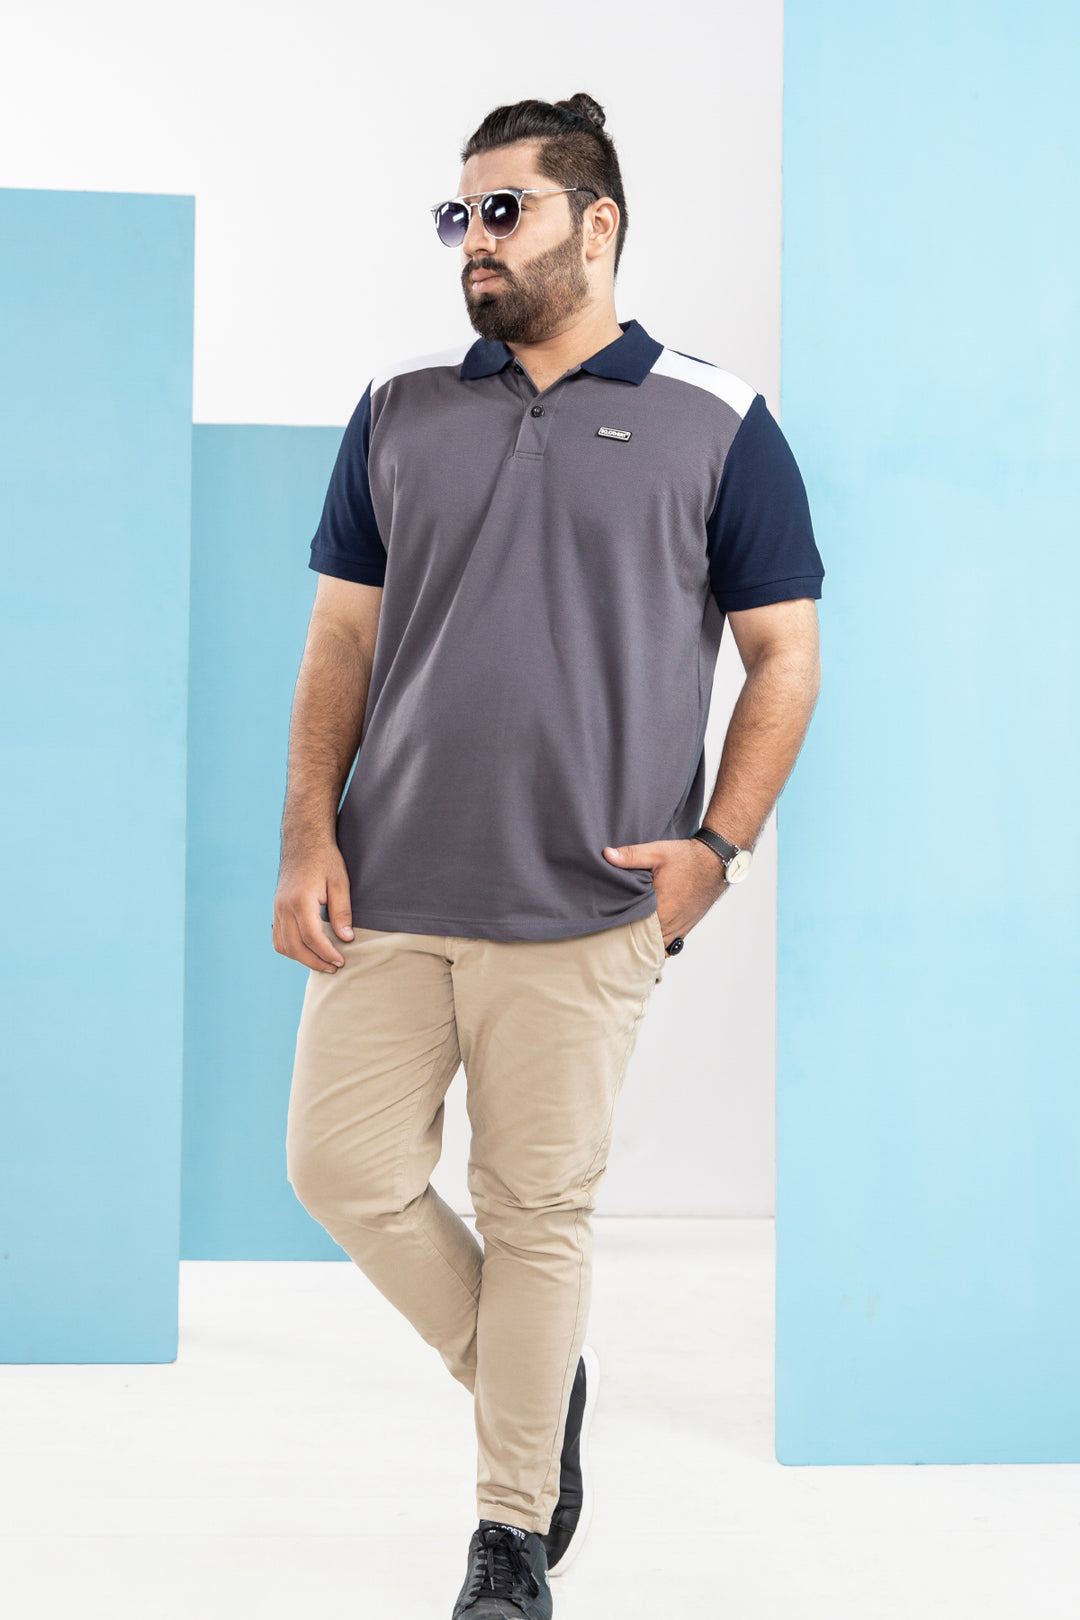 Embellished Cut & Sew Polo (Plus Size) - S21 - MP0032P